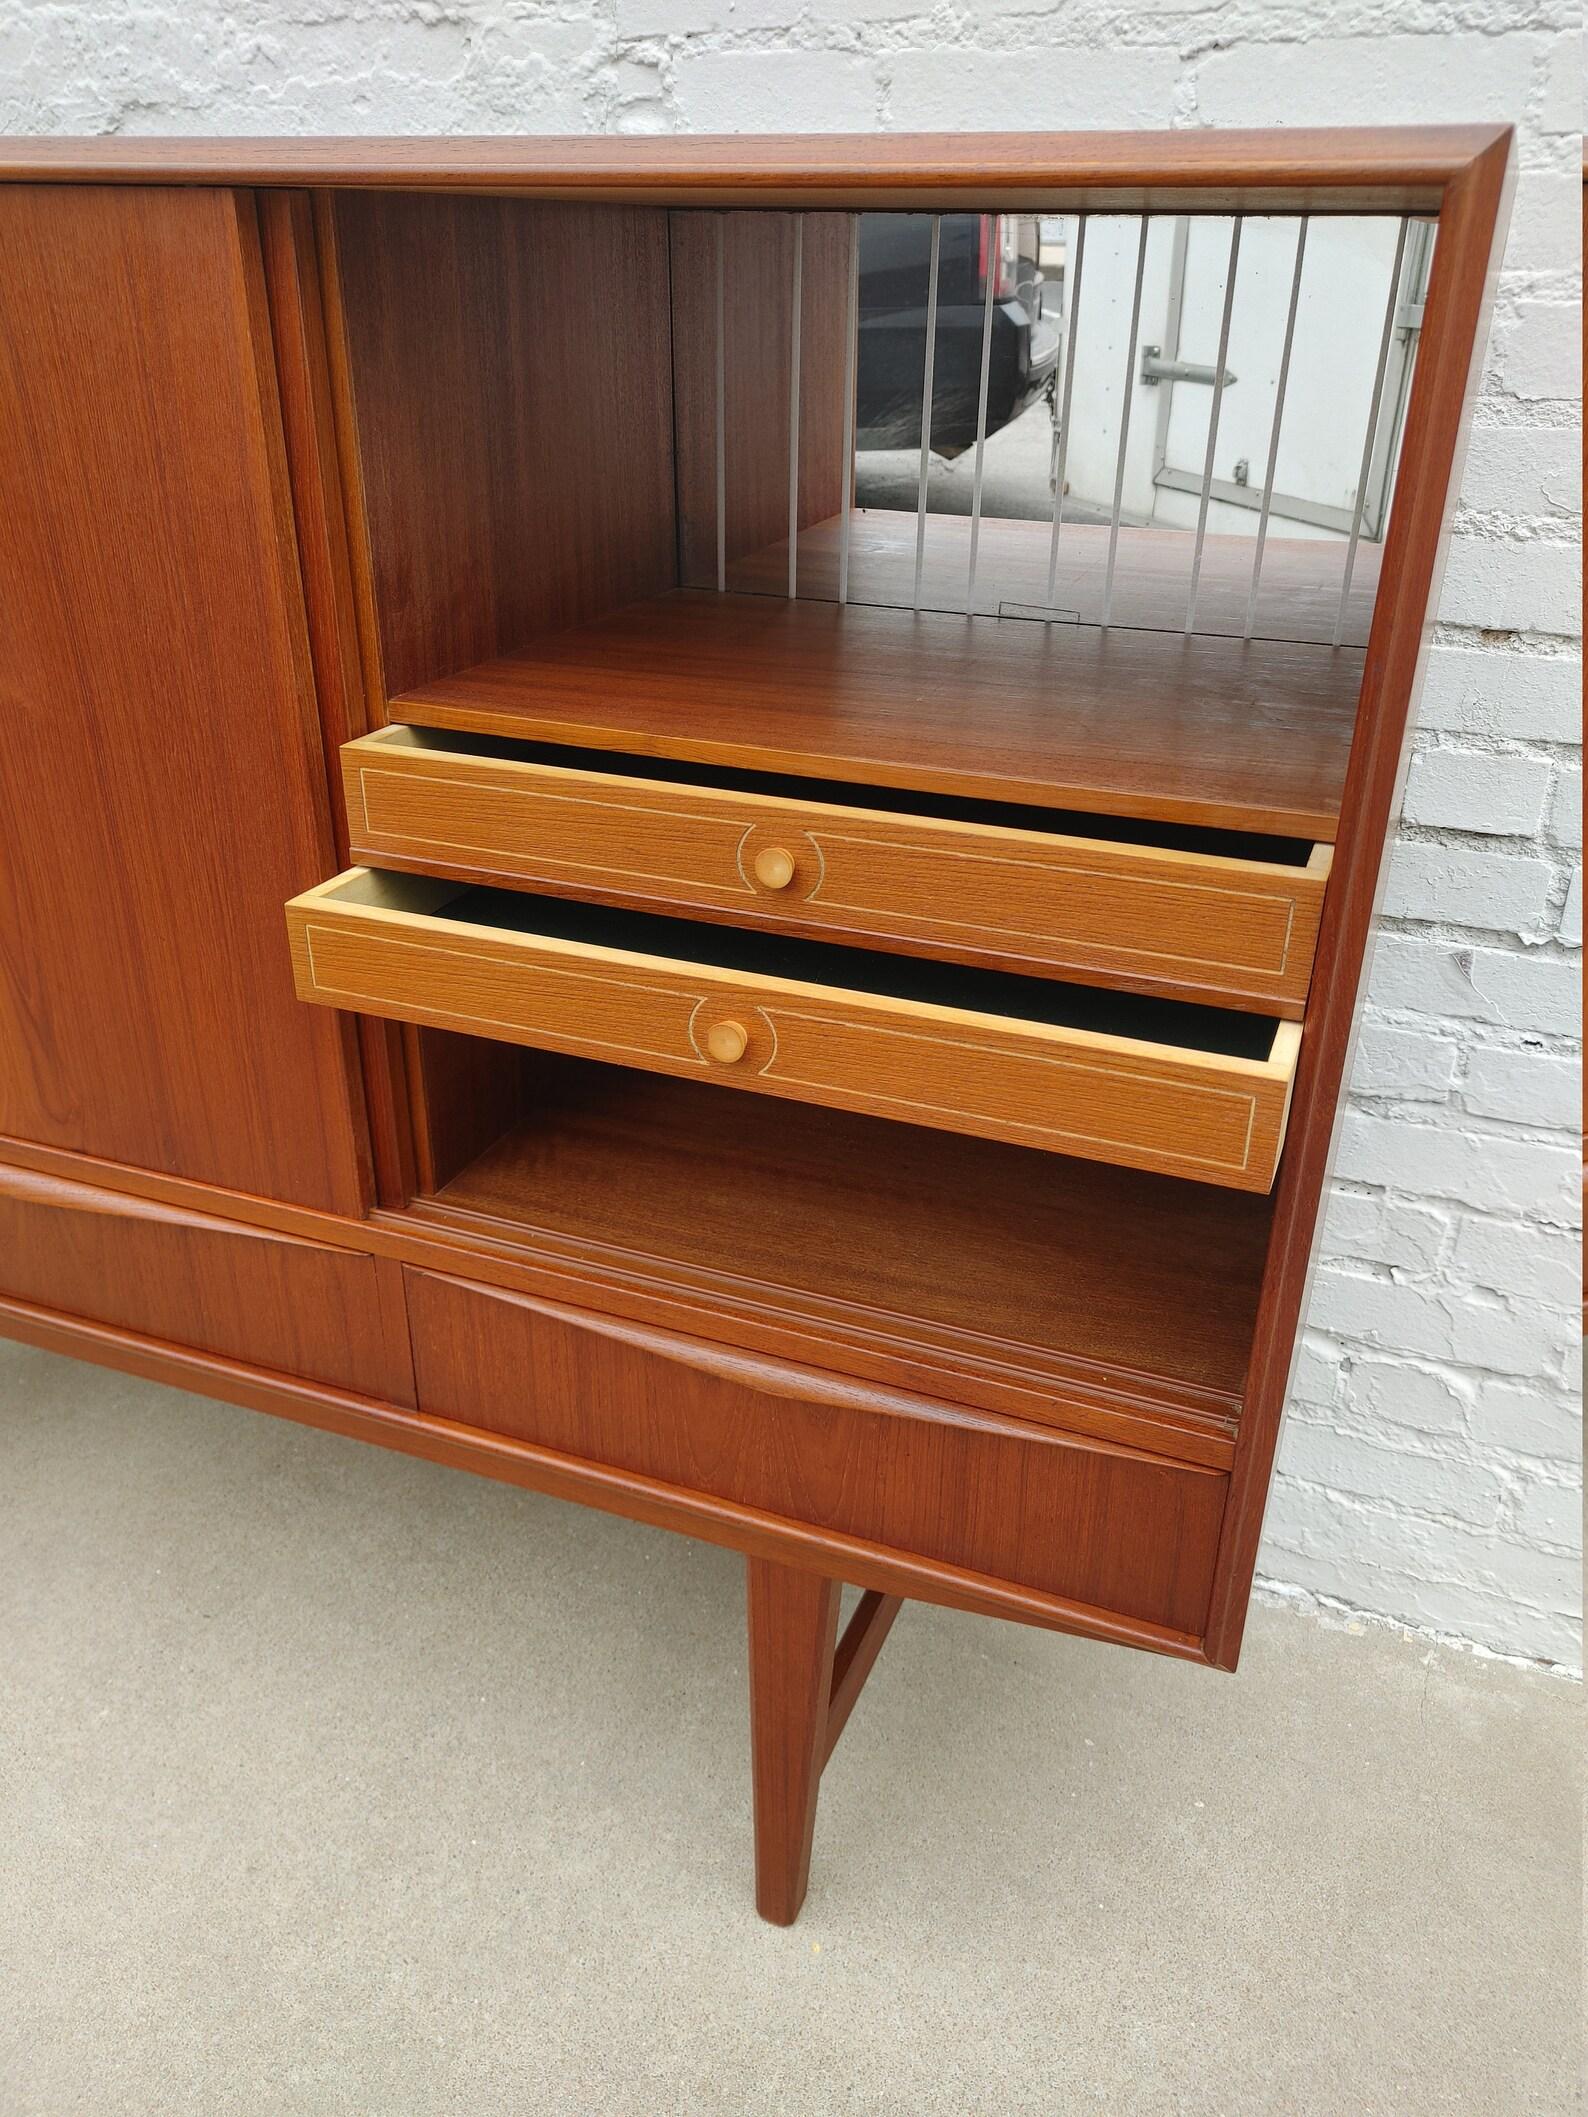 Mid Century Modern Scandinavian Teak Cabinet

Above average vintage condition and structurally sound. Has some expected slight finish wear and scratching.

Additional information:
Materials: Teak
Vintage from the 1960s
Dimensions: 65  W x 17.25  D x